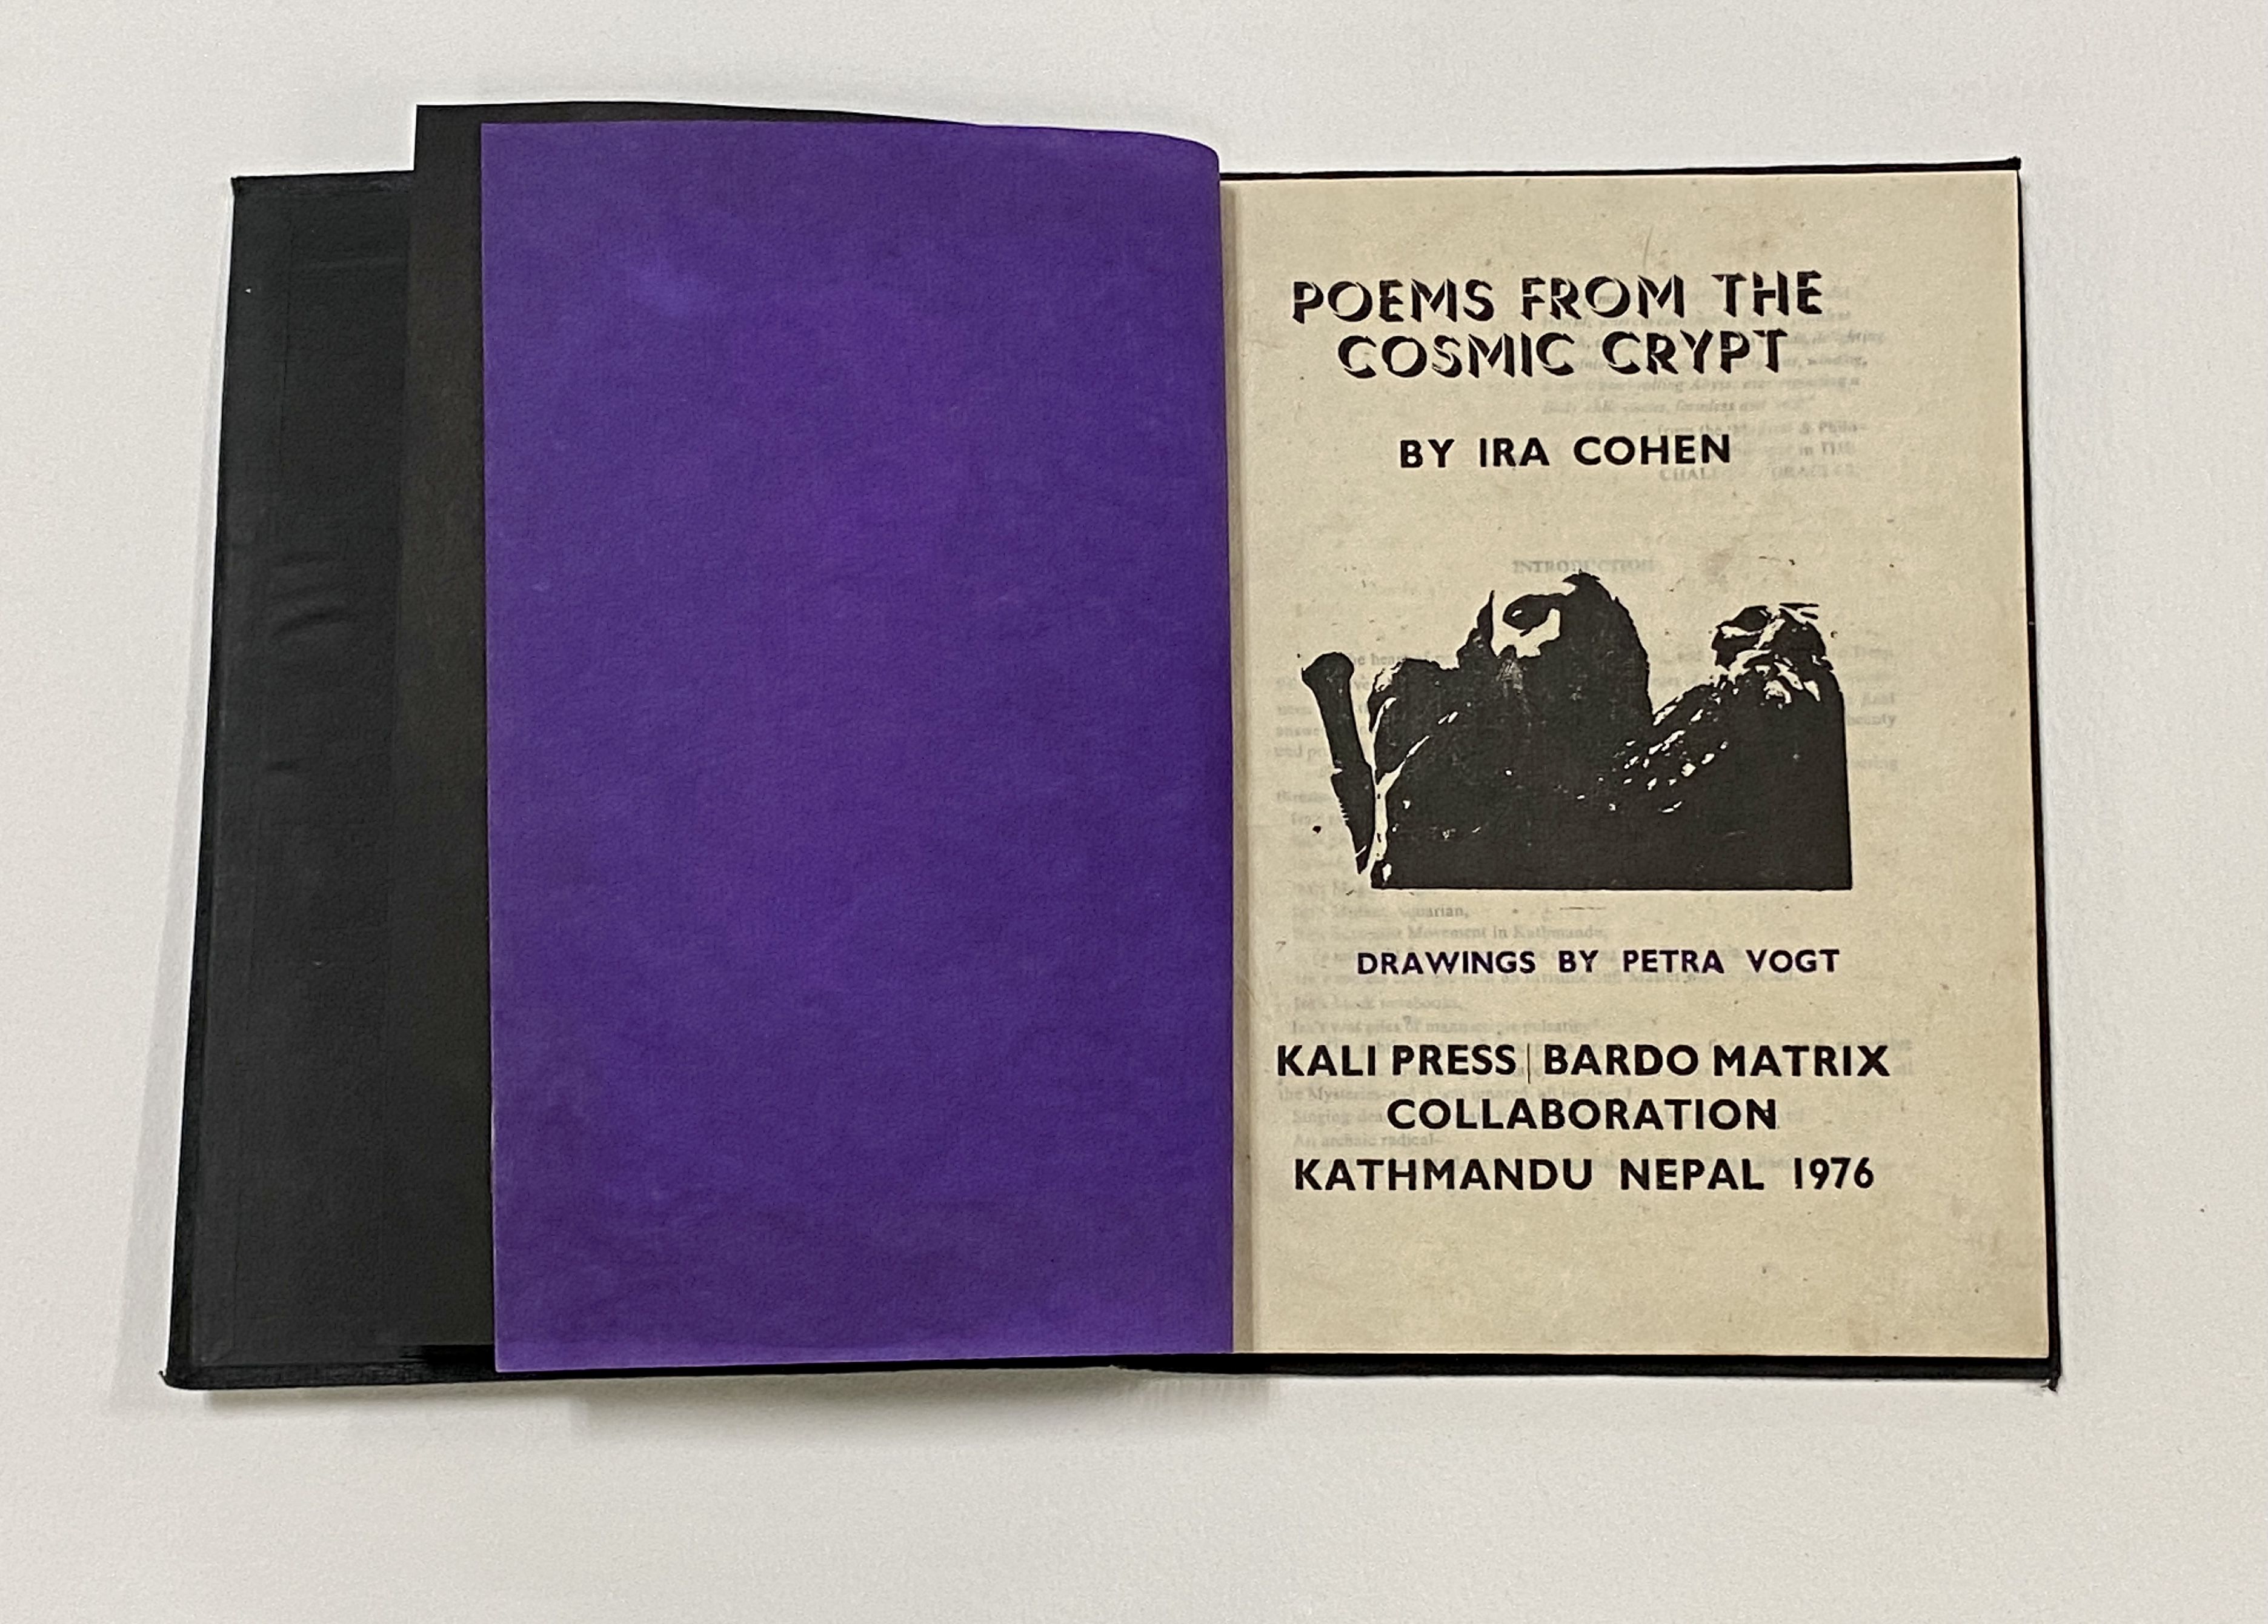 A hardcover book with black endpapers lies open on a surface, open to the title page. The verso is a deep purple, and the recto holds the title information and a black and white photographic image of a man. 